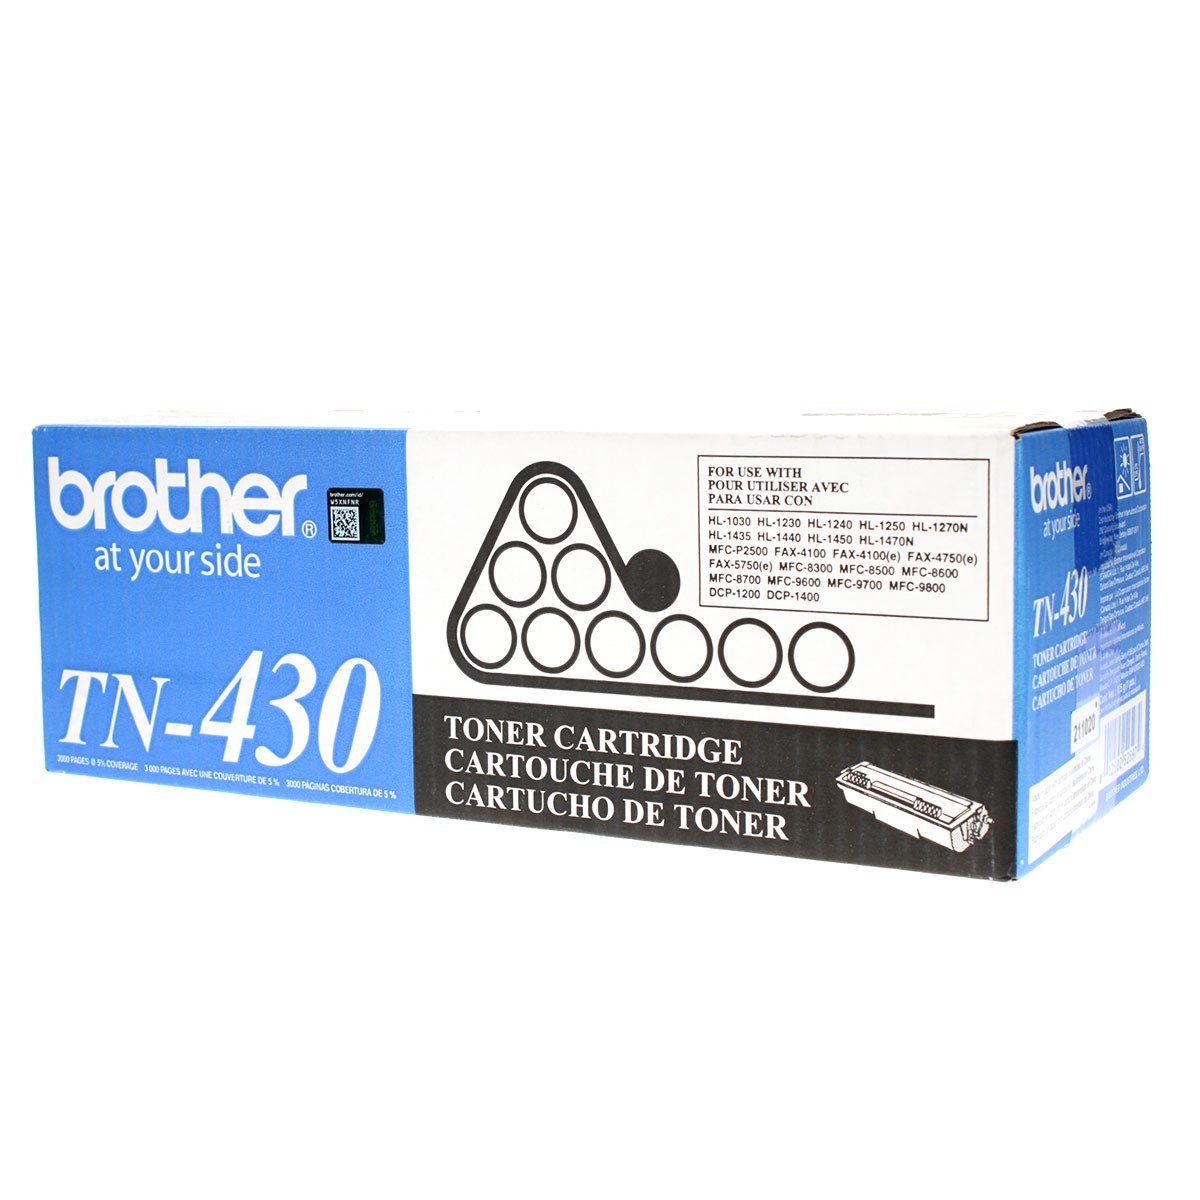 Brother TN430 OEM Toner Black 3K Yield for use in DCP1200, DCP1400, HL